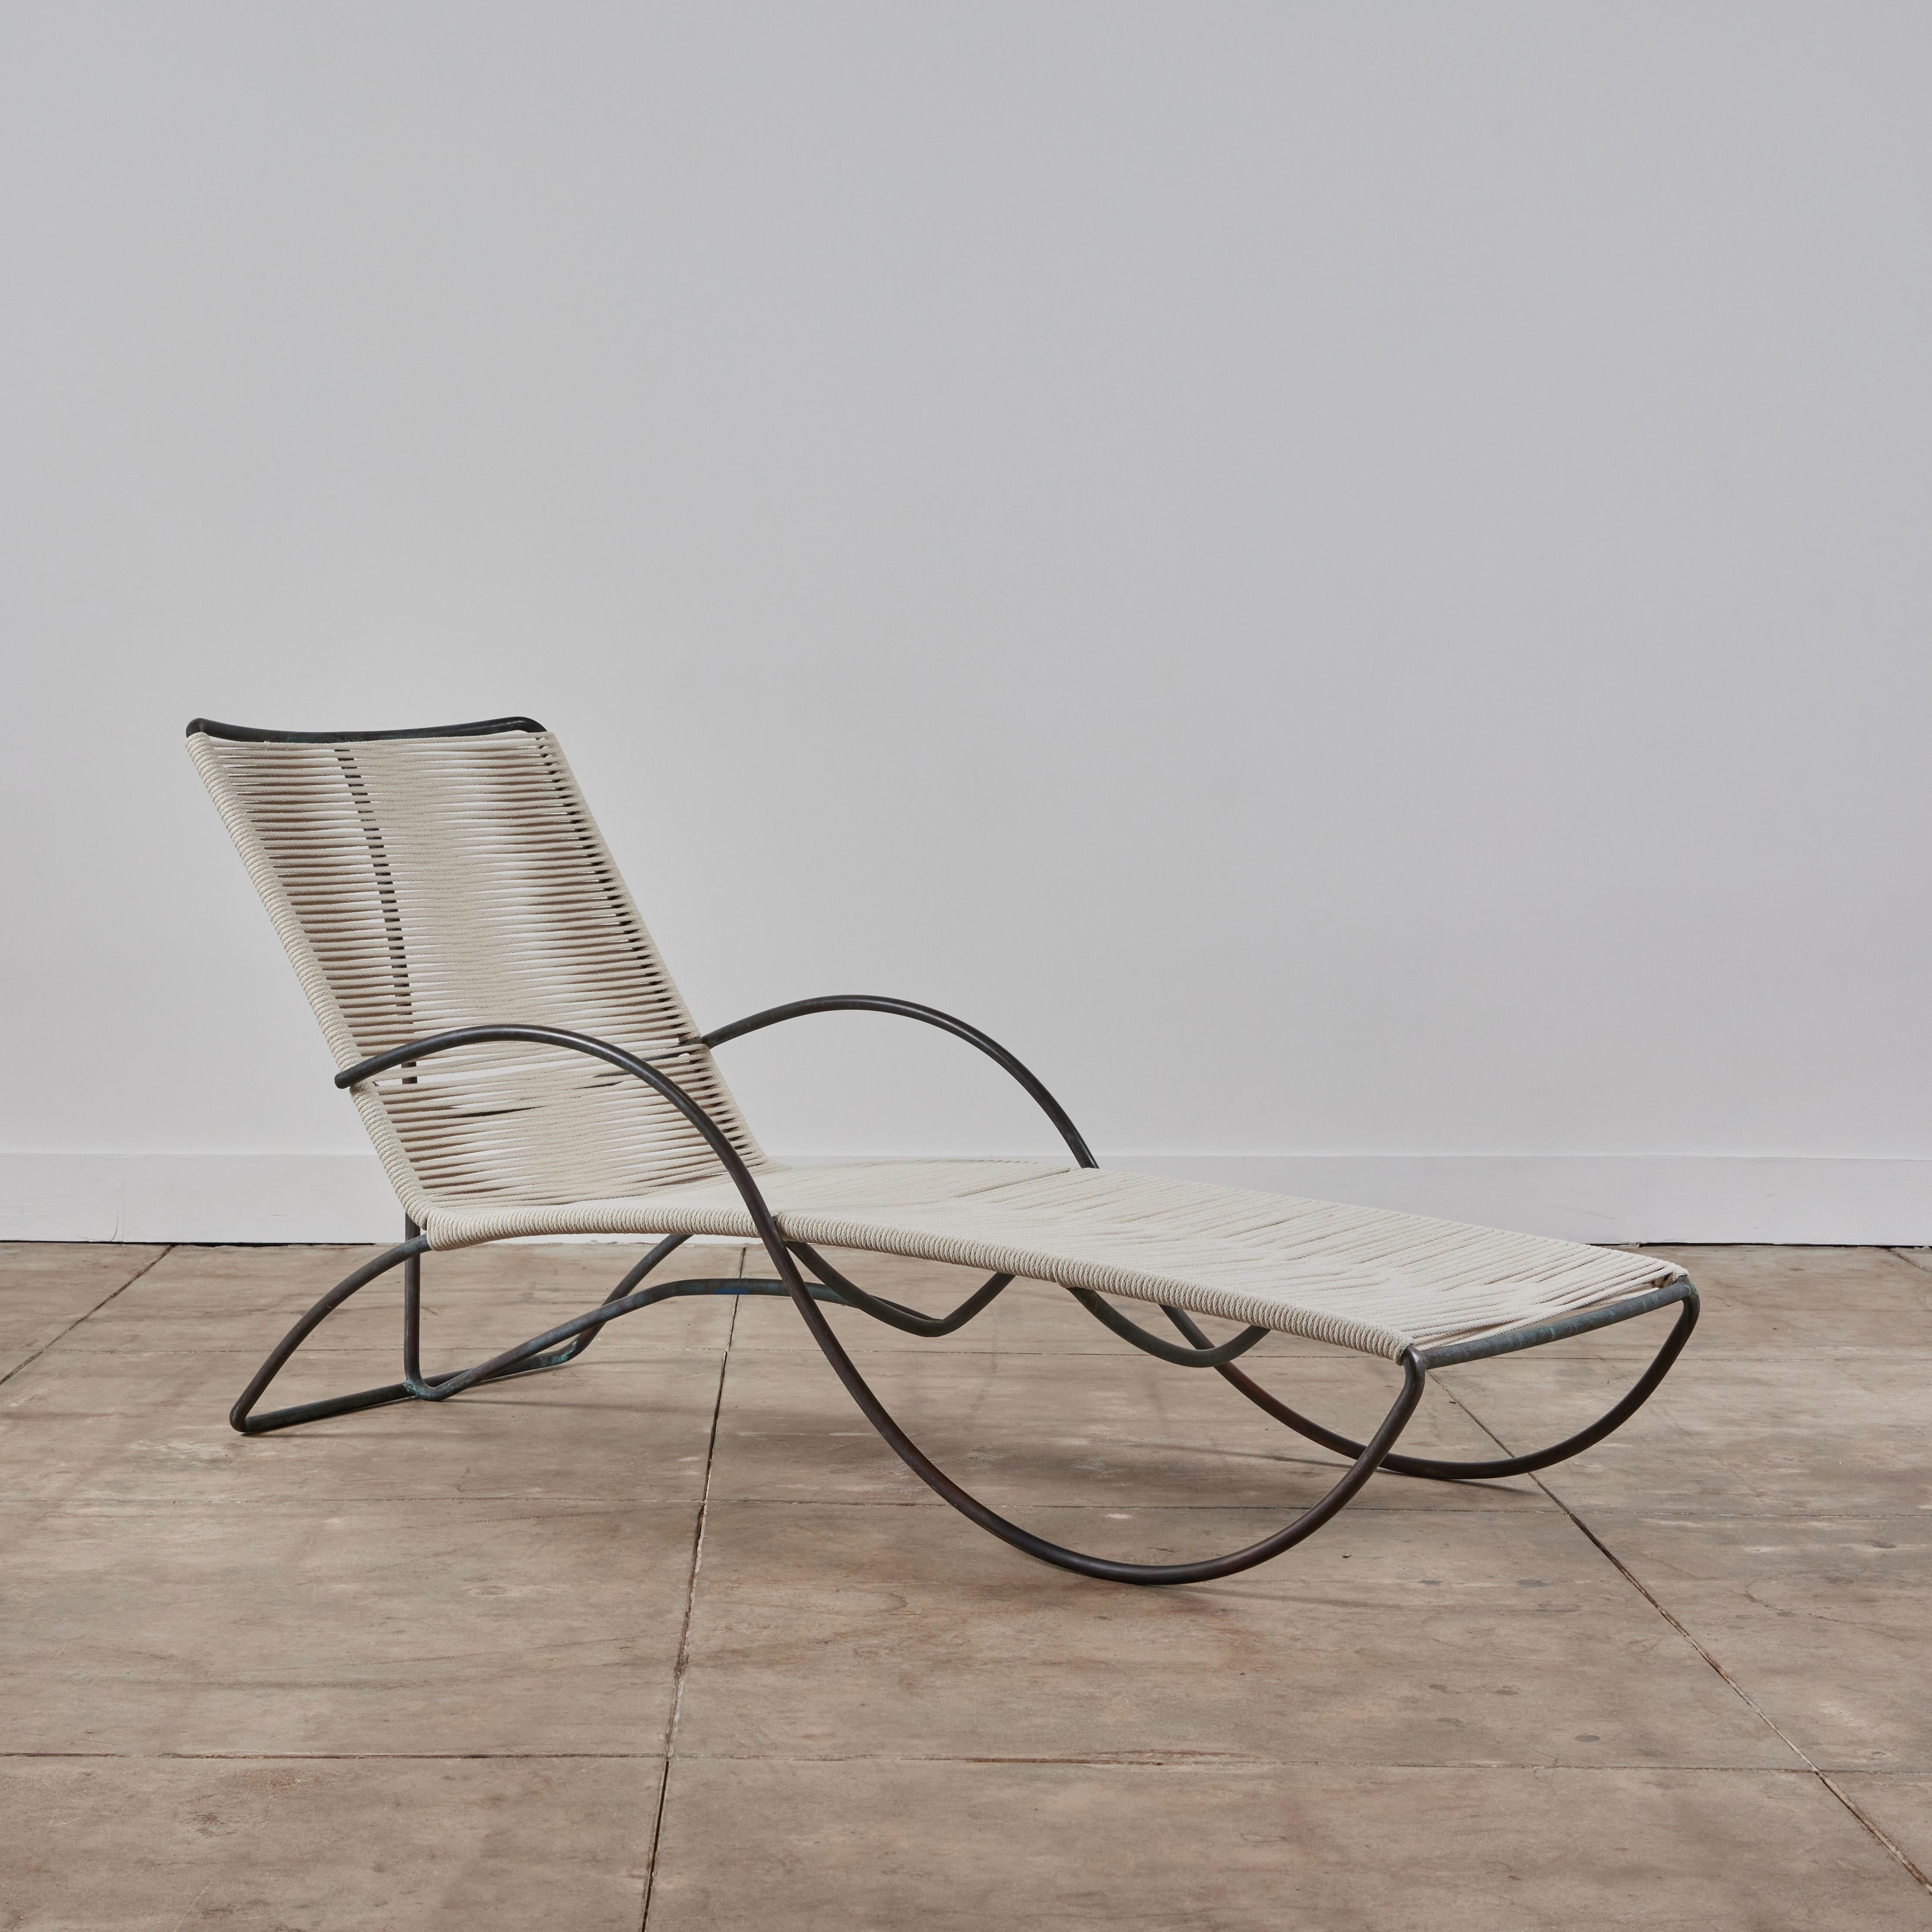 S-Lounge patio chair by Walter Lamb for Brown Jordan. Graceful even for a Lamb design, the chaise lounge is rendered in bronze tubing with a seat of woven yacht cord. Its namesake armrest draws a serpentine curve from the backrest to the front edge